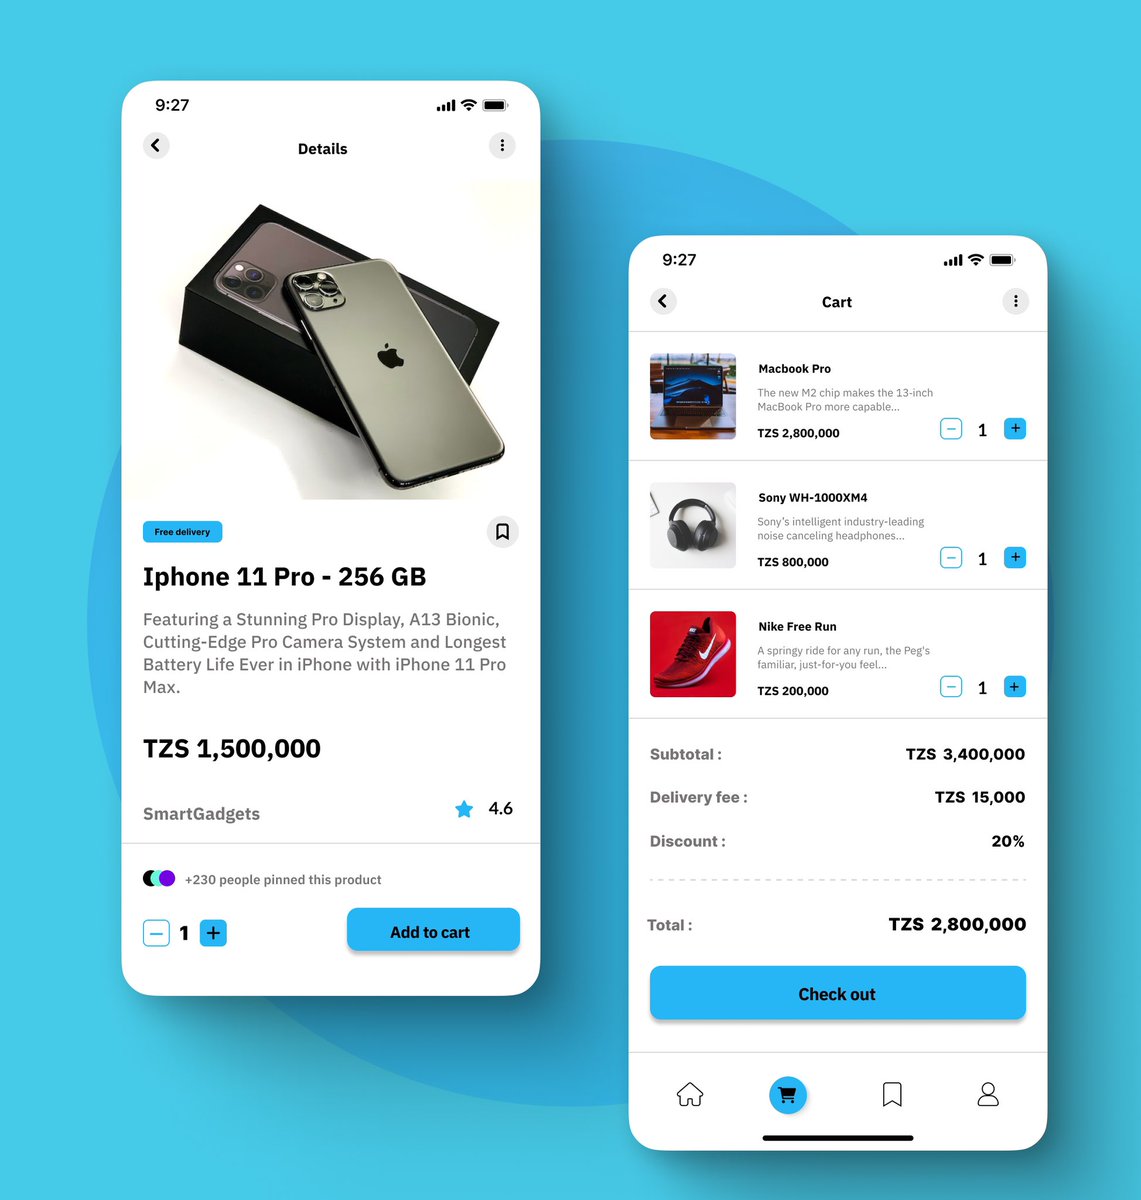 Just designed an  e-commerce app concept. Now it’s time to turn it into reality. 
#uiuxdesign #EcommerceDesign